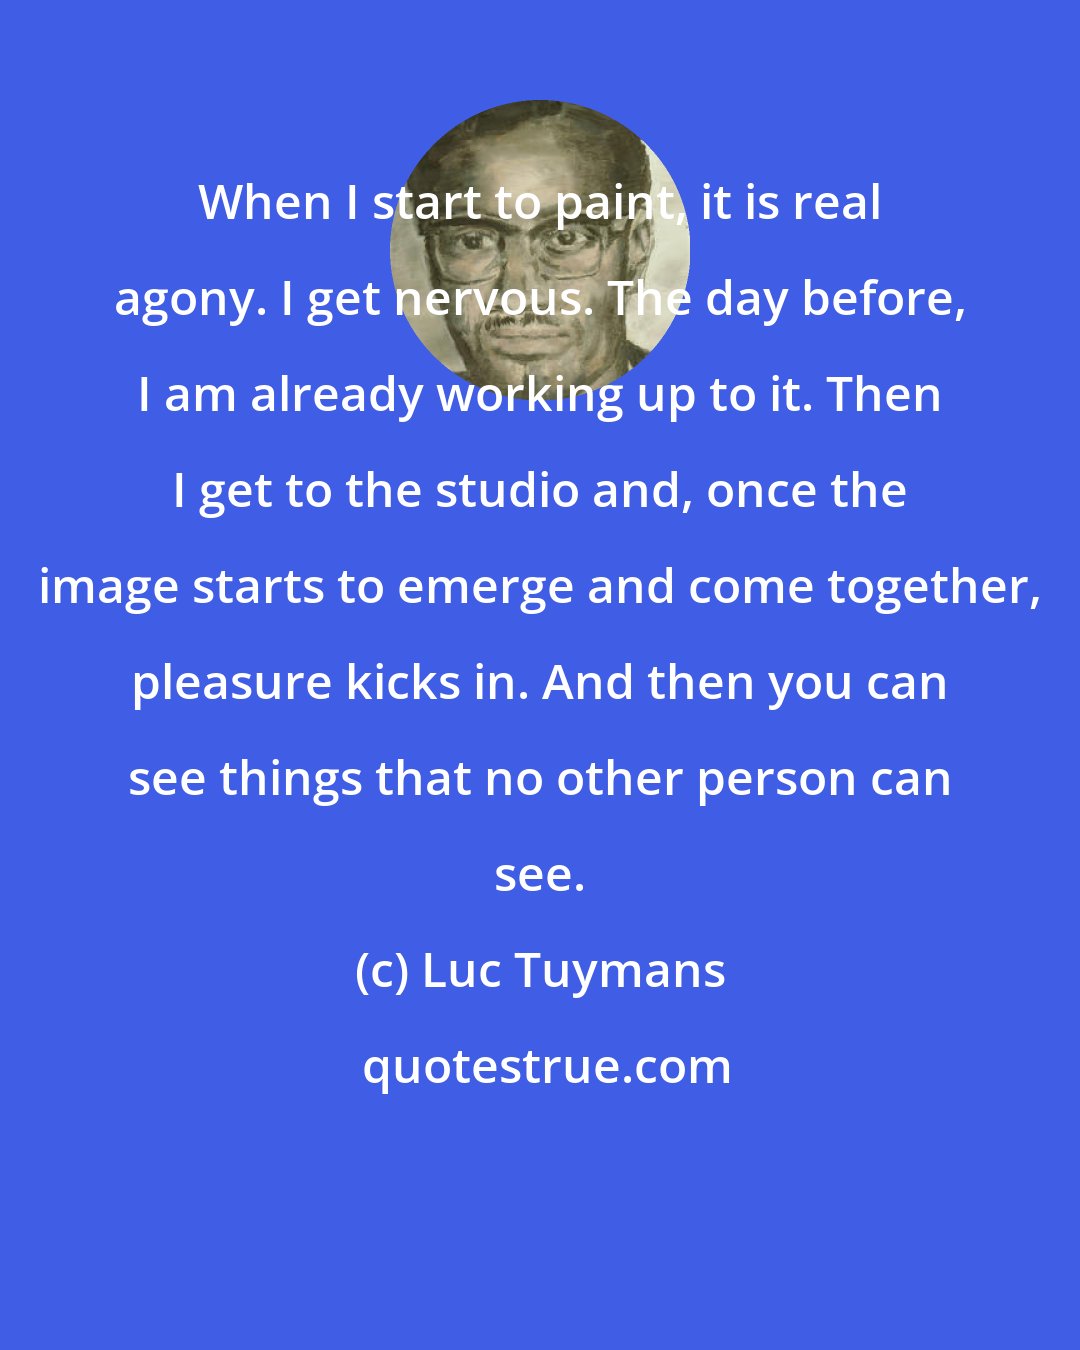 Luc Tuymans: When I start to paint, it is real agony. I get nervous. The day before, I am already working up to it. Then I get to the studio and, once the image starts to emerge and come together, pleasure kicks in. And then you can see things that no other person can see.